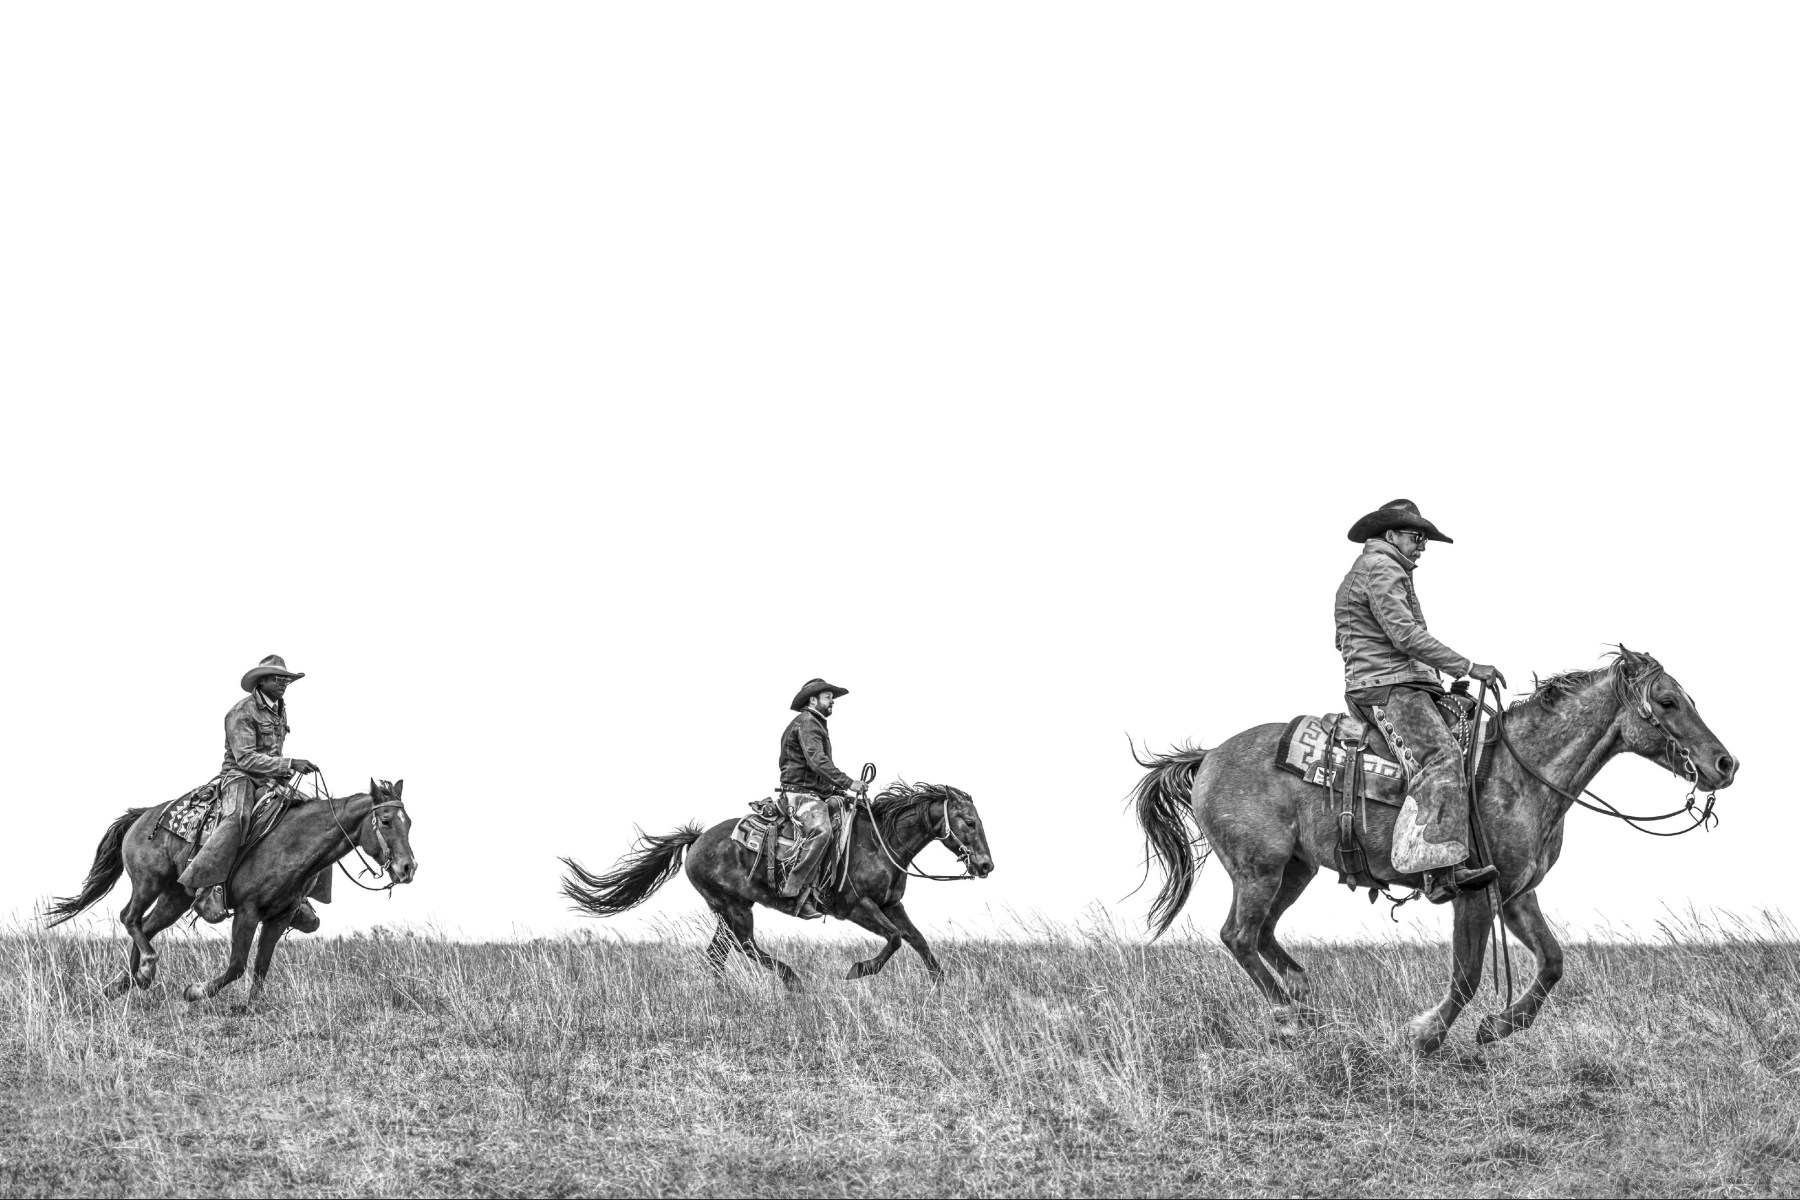 The front cover French photographer Anouk Krantz's "American Cowboys" from Images Publishing.